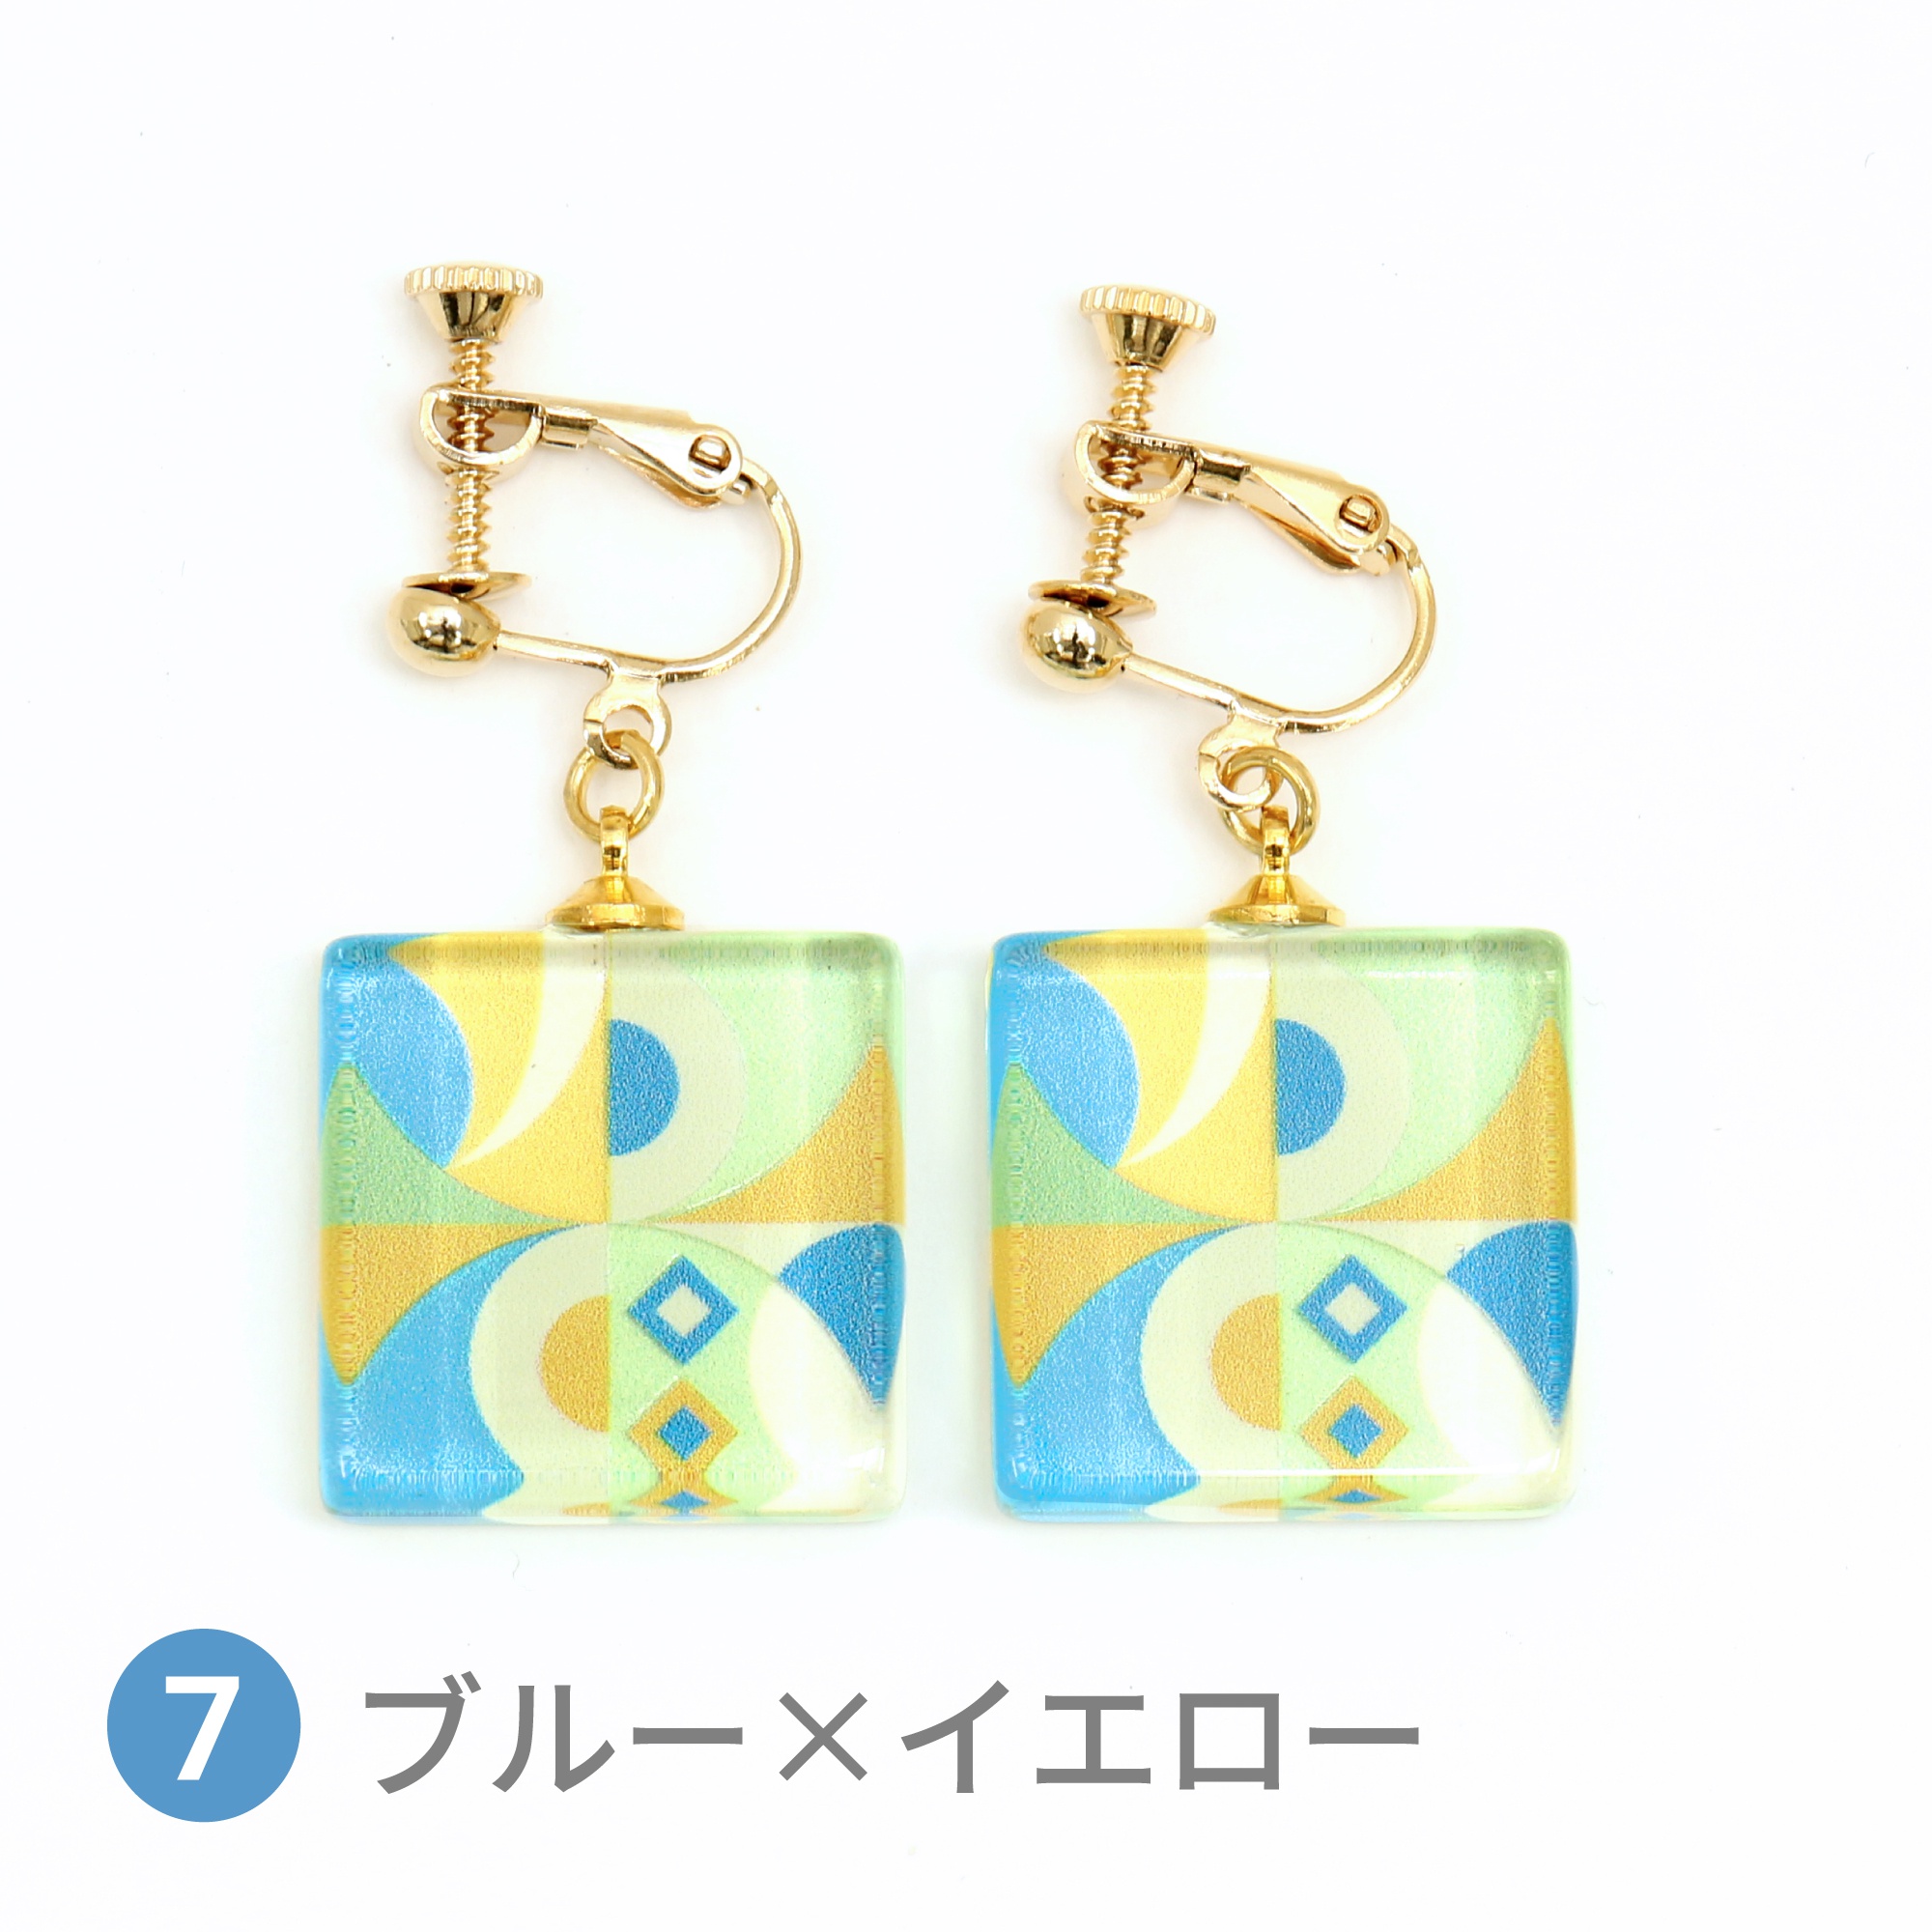 Glass accessories Earring GRID SYSTEM blue&yellow square shape